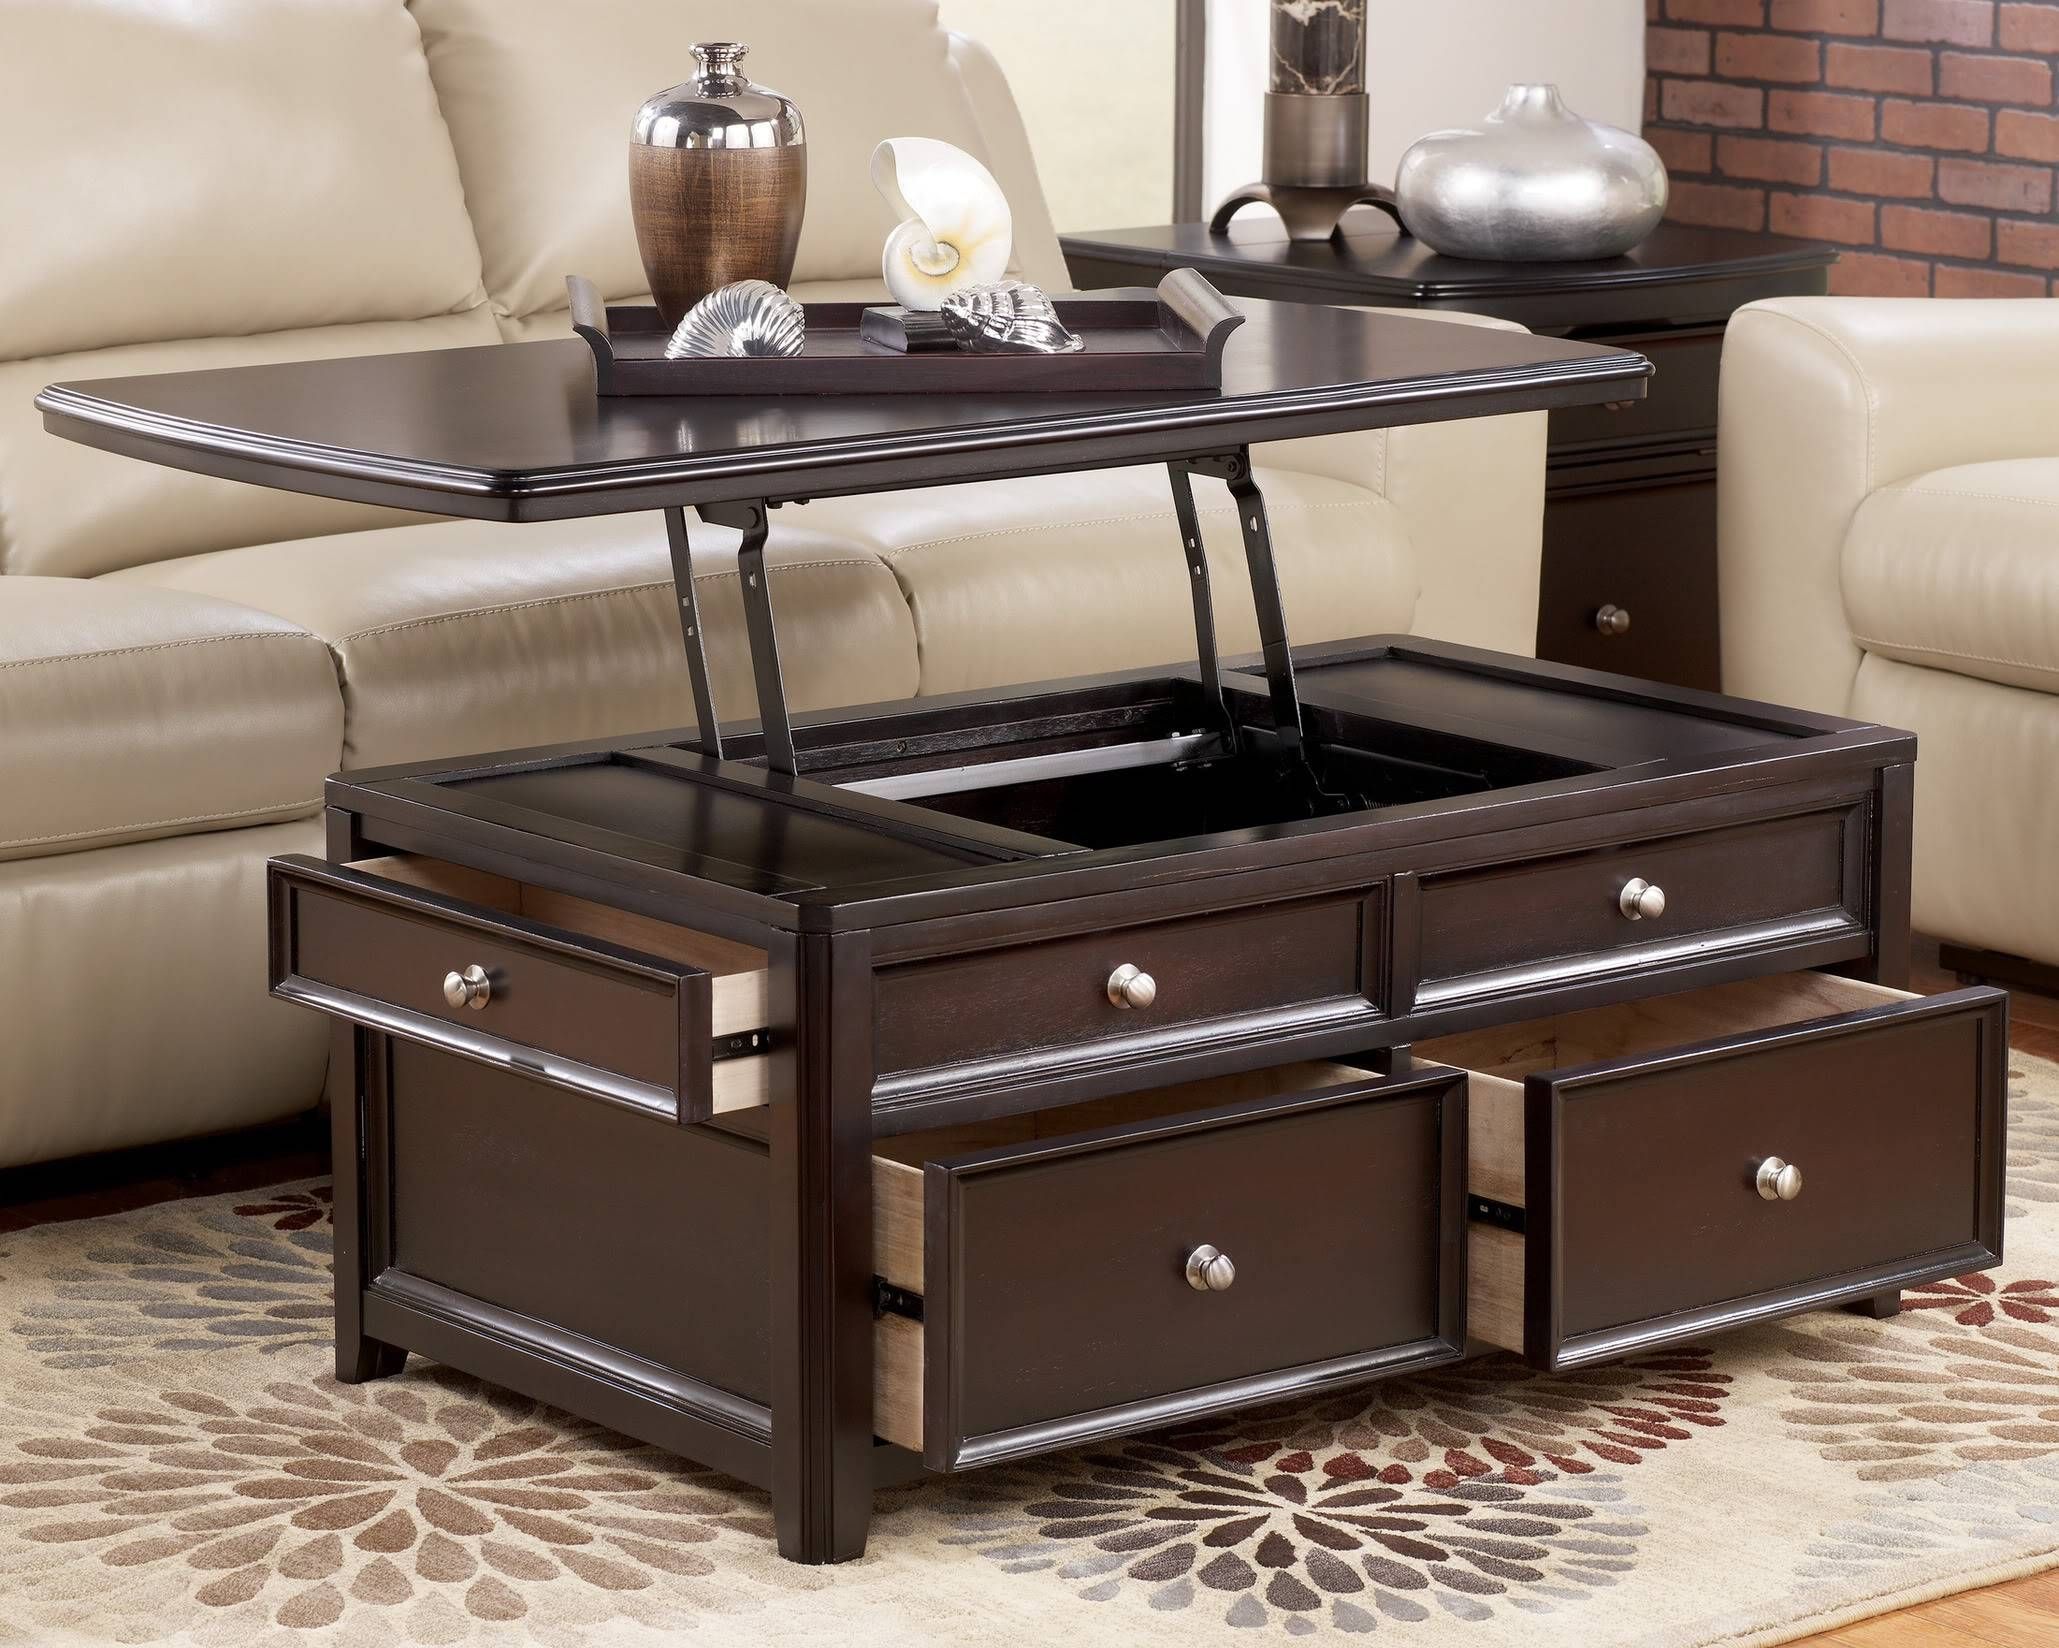 Sedona Lift Top Coffee Table In Java With 4 Storage Ottomans With Regard To Coffee Table With Raised Top (View 18 of 30)